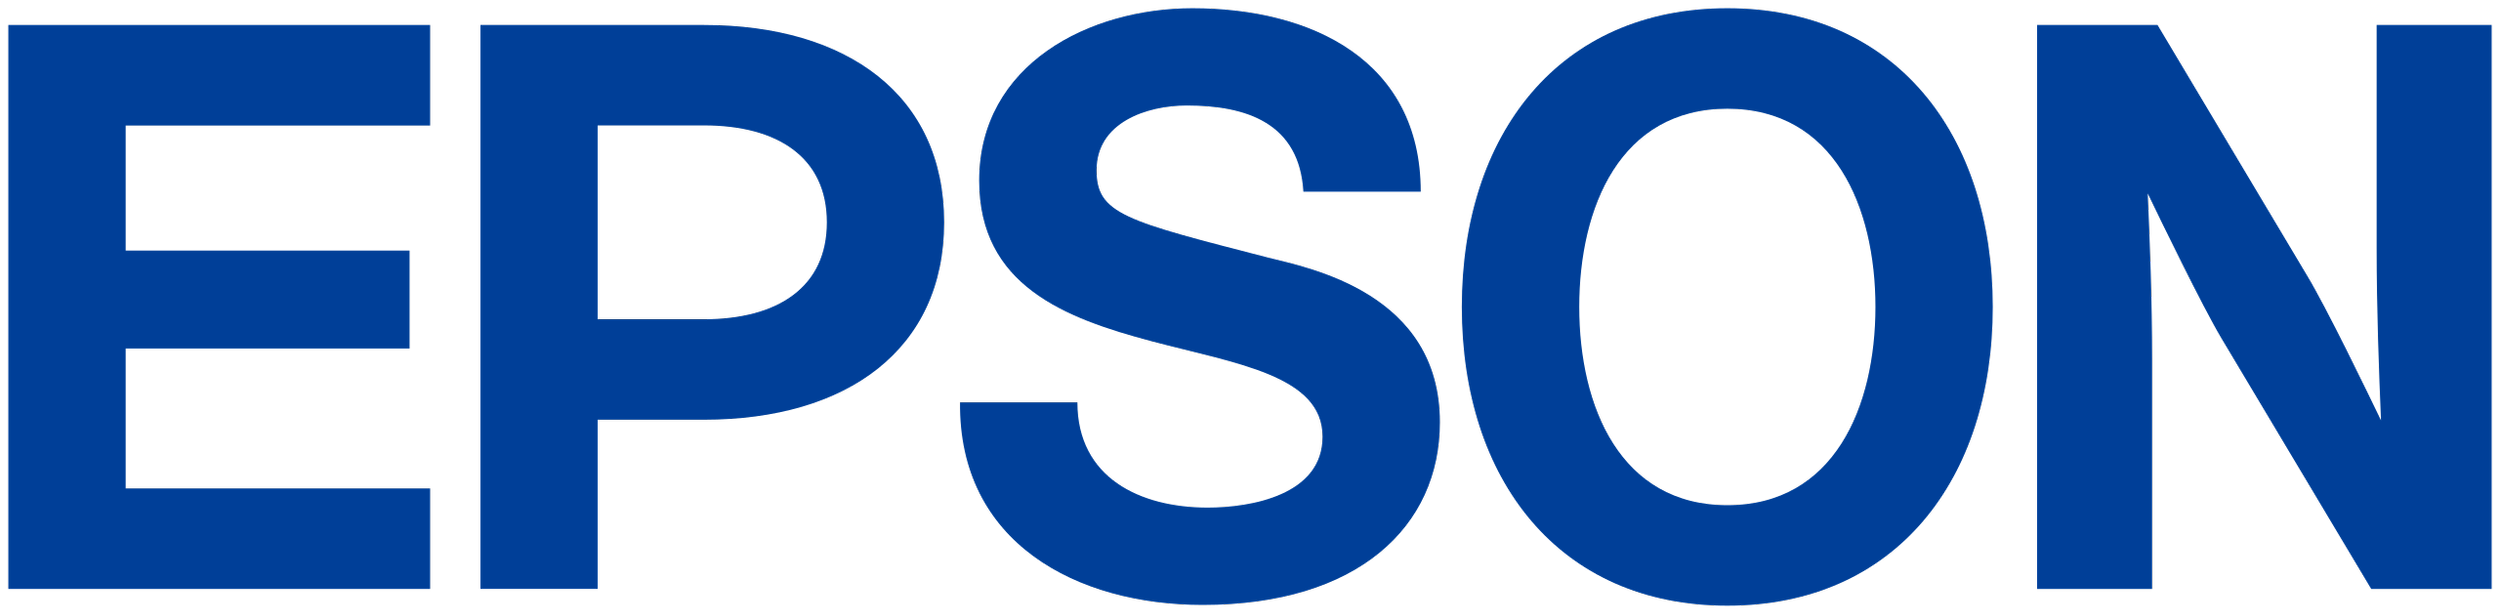 2560px-Epson_logo.svg.png